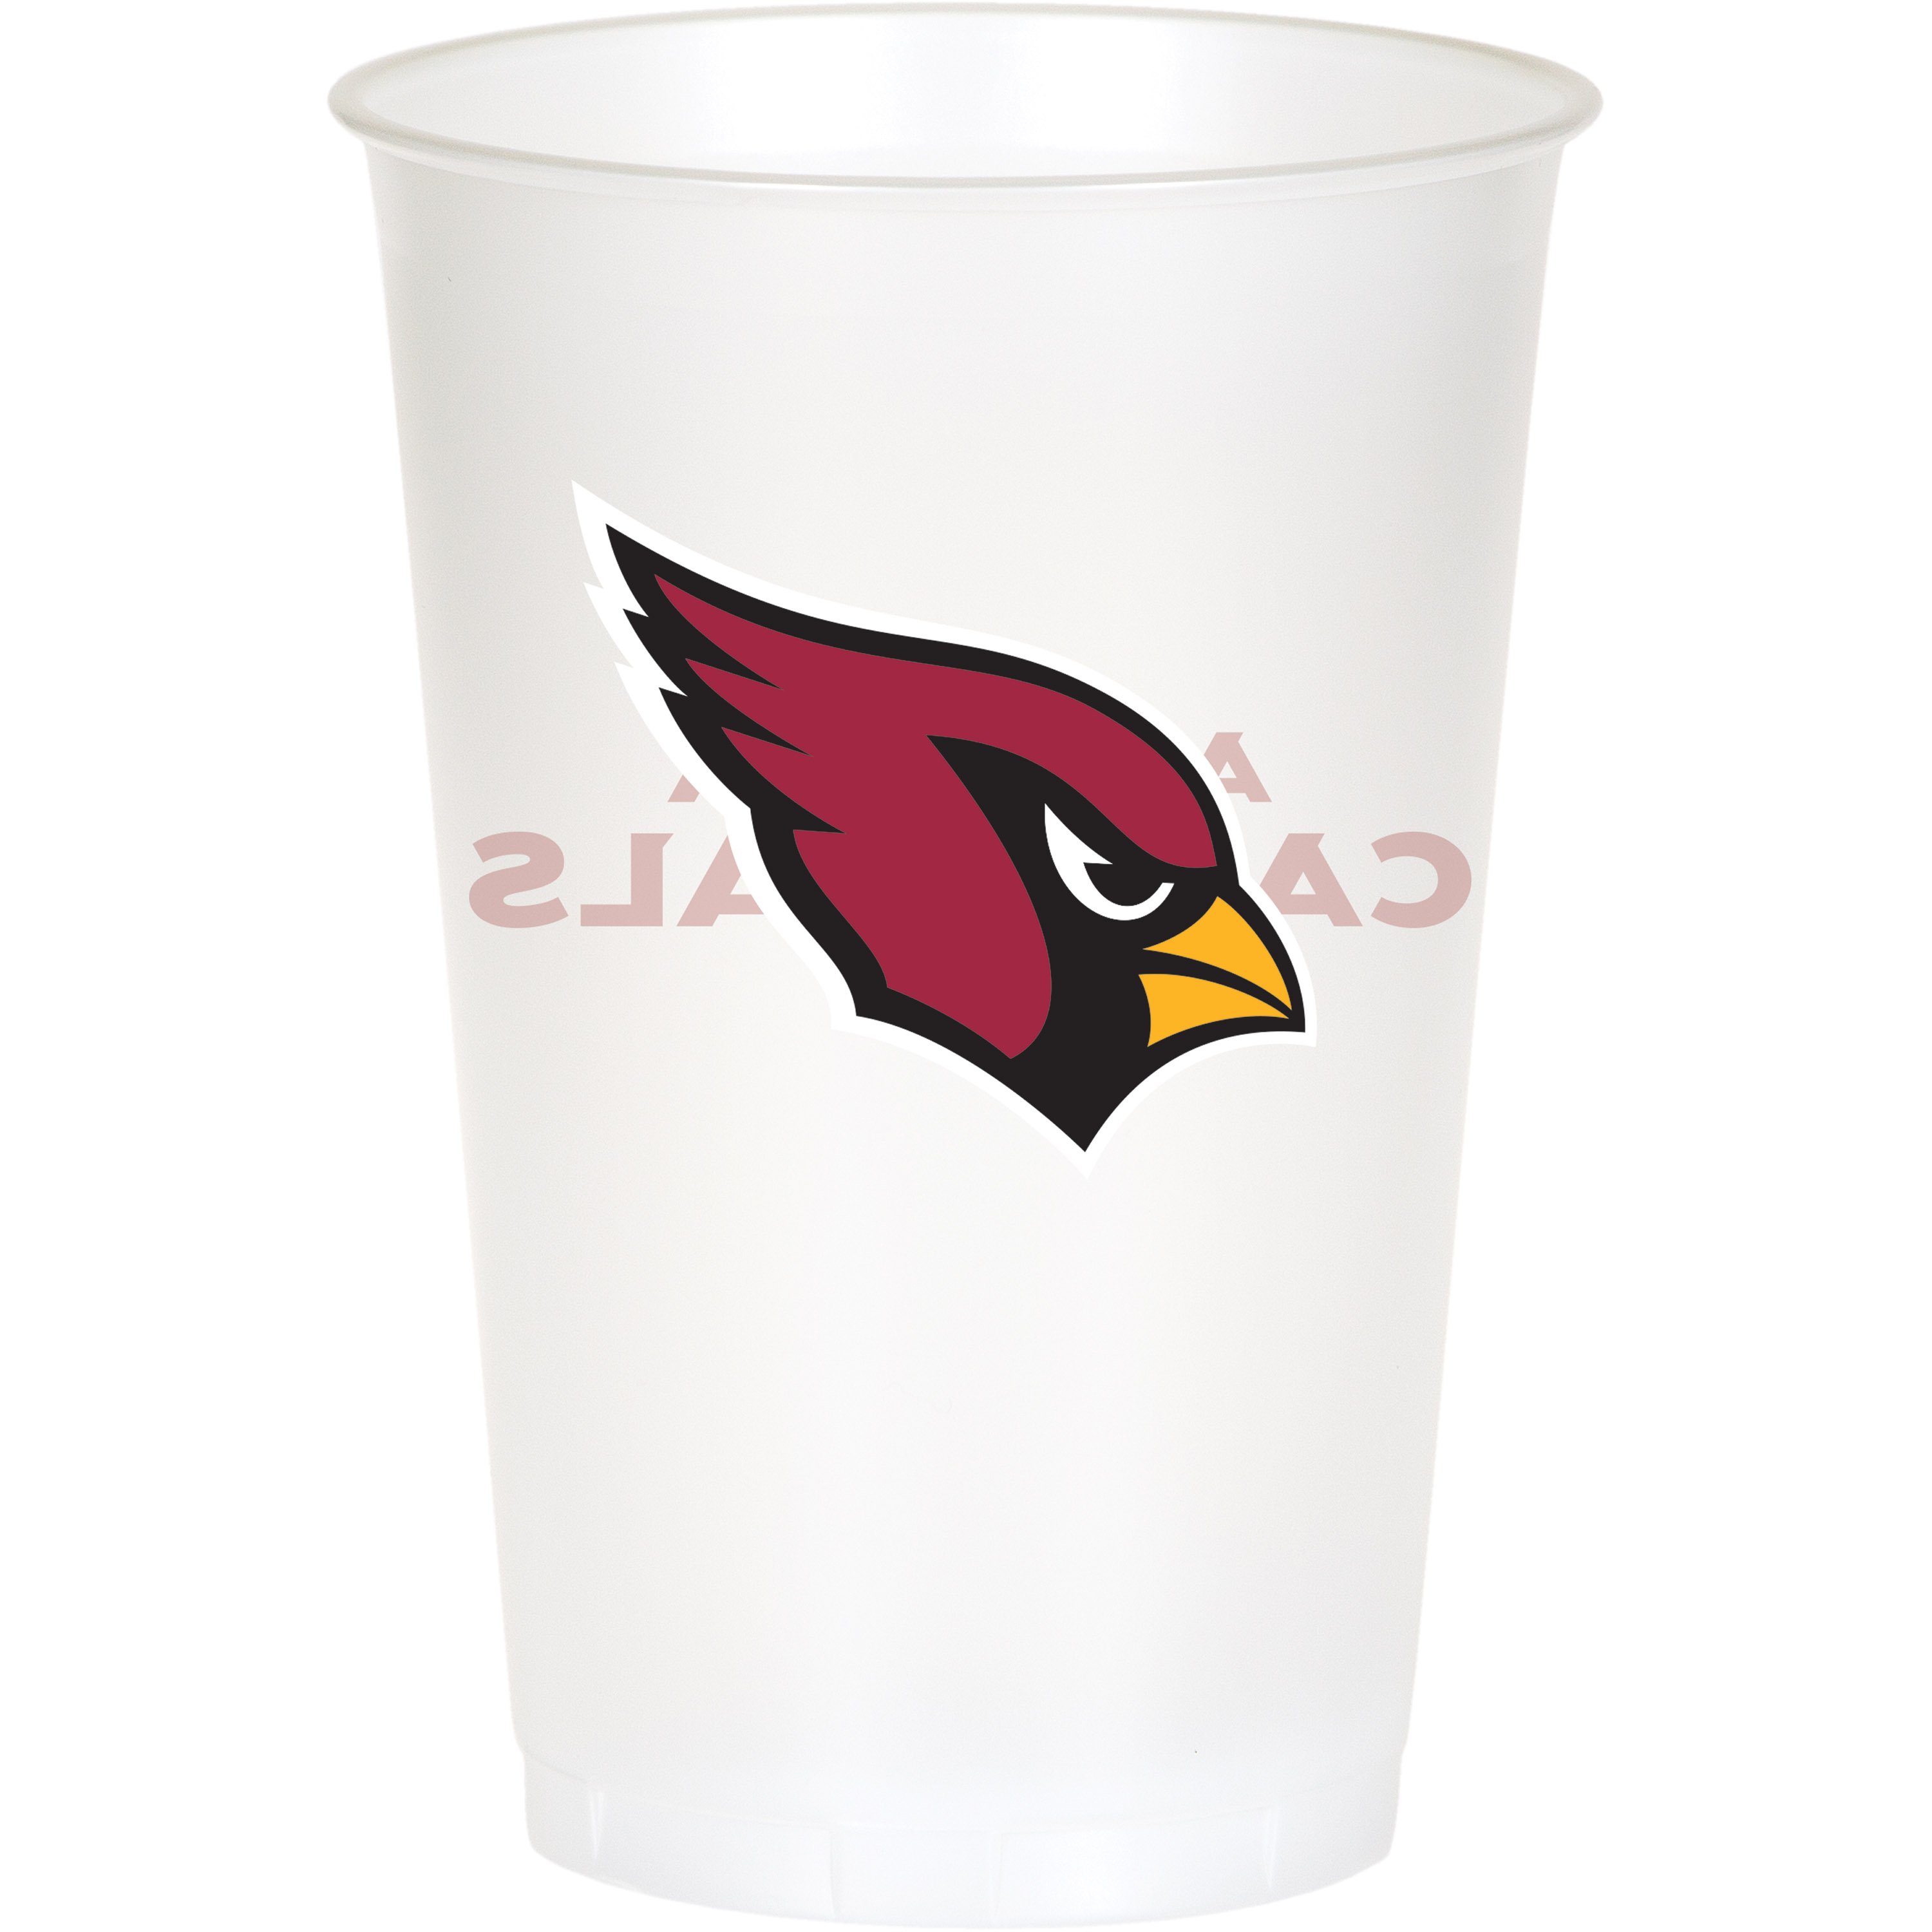 Arizona Cardinals Plastic Cups, 24 Count for 24 Guests - image 1 of 4